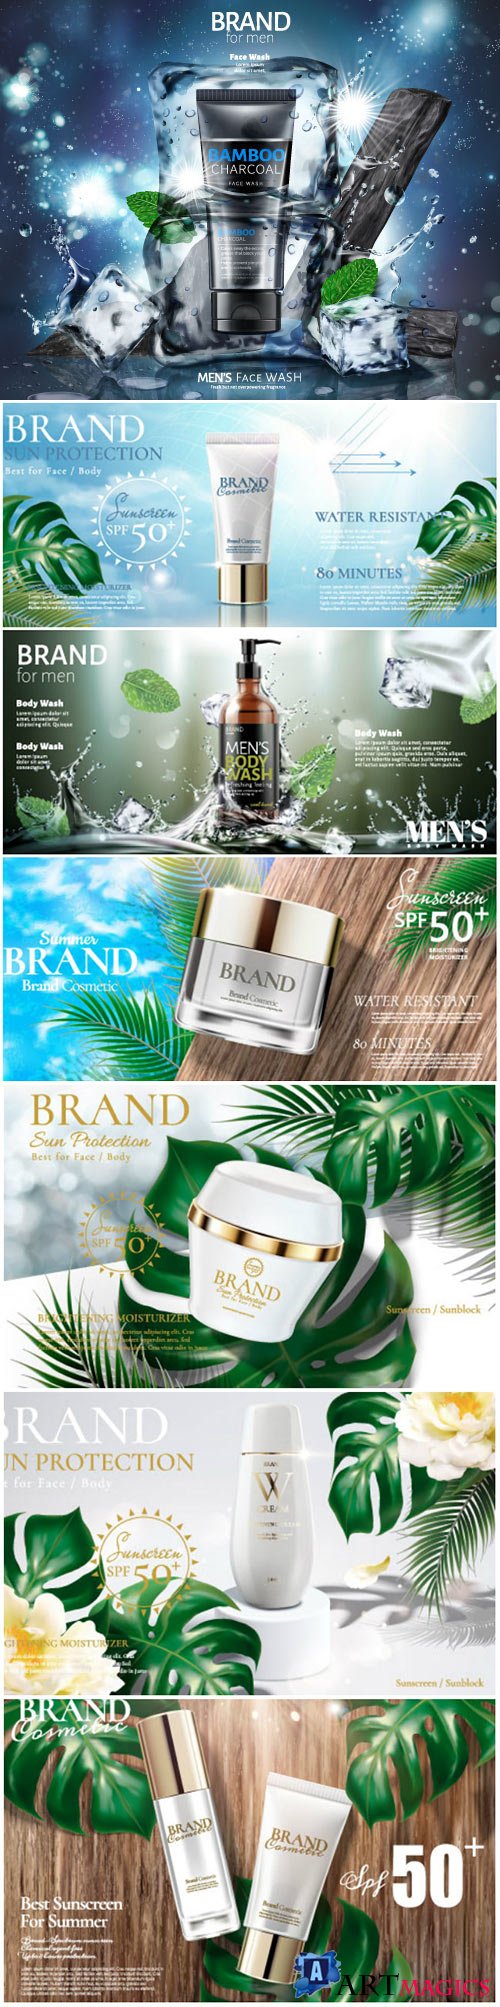 Brand cosmetic design, foundation banner ads